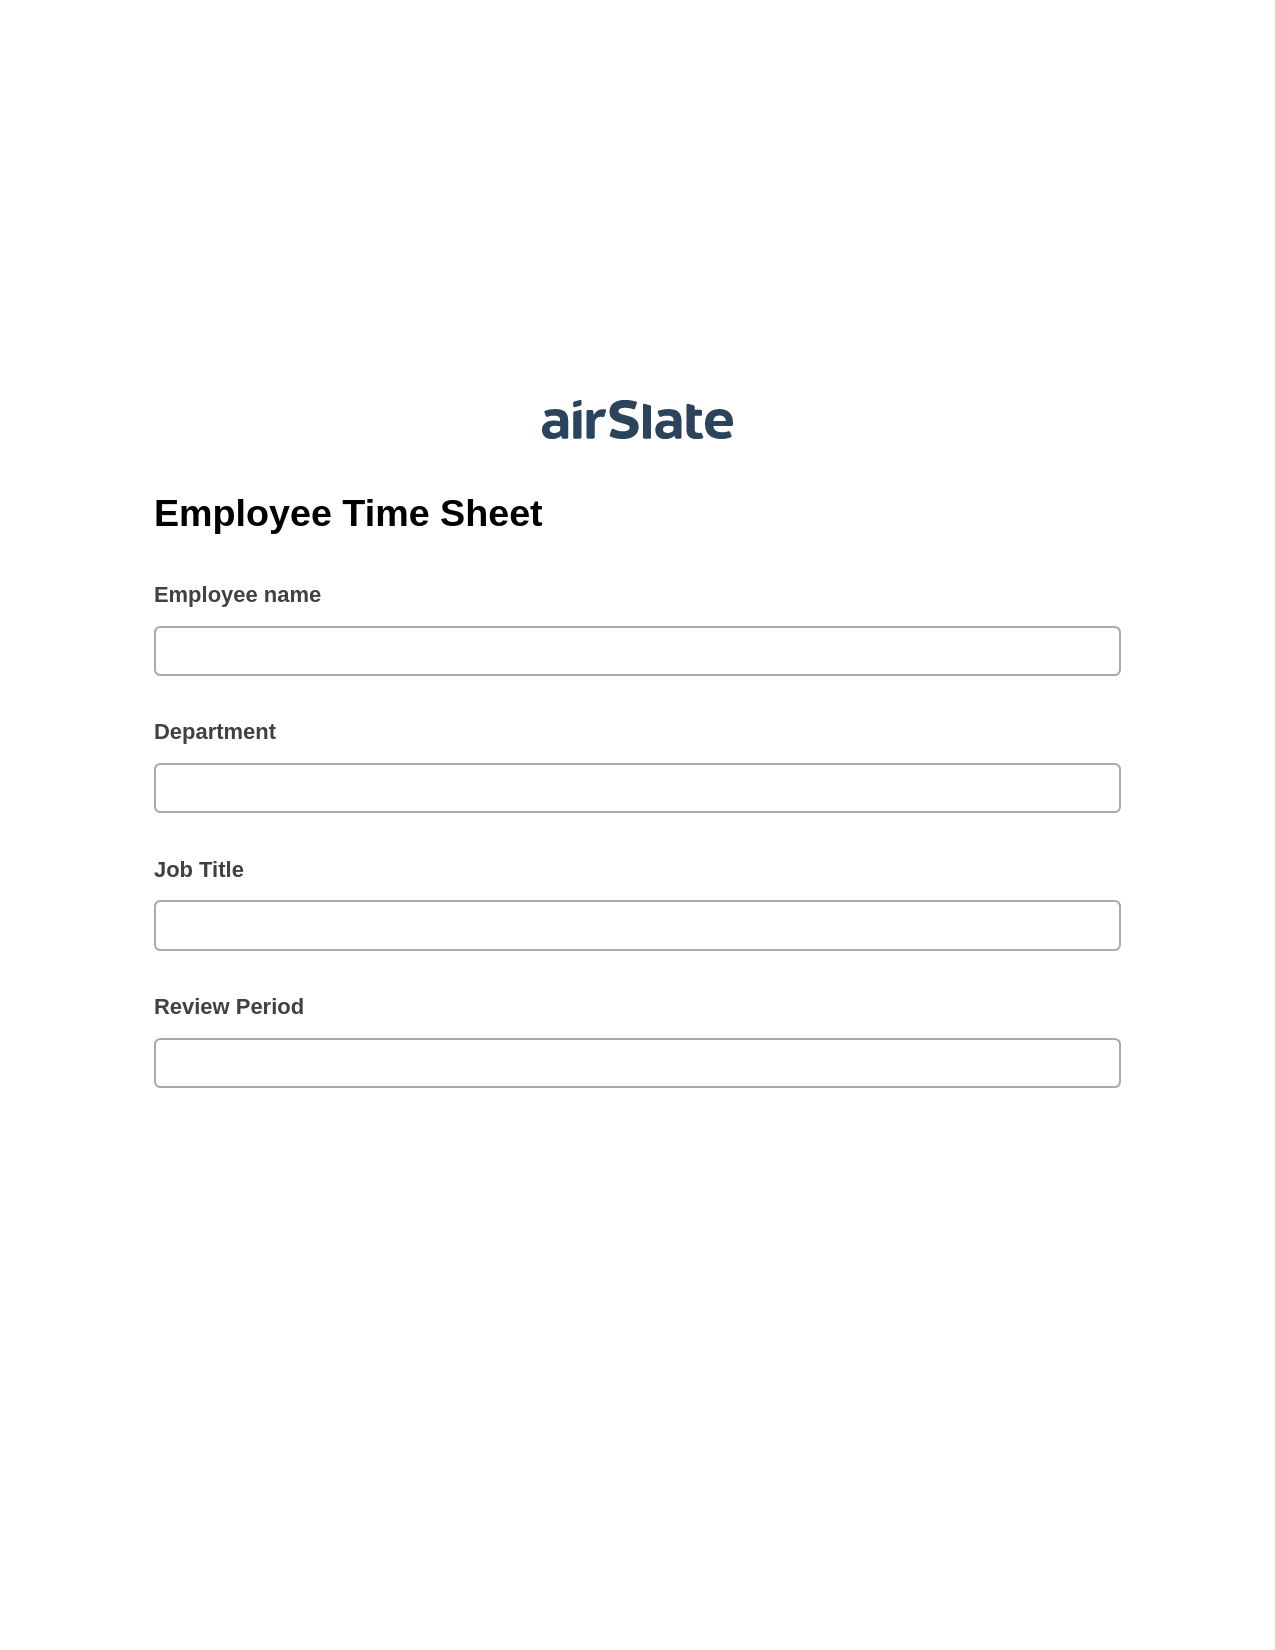 Employee Time Sheet Pre-fill Dropdowns from CSV file Bot, Roles Reminder Bot, Archive to Dropbox Bot